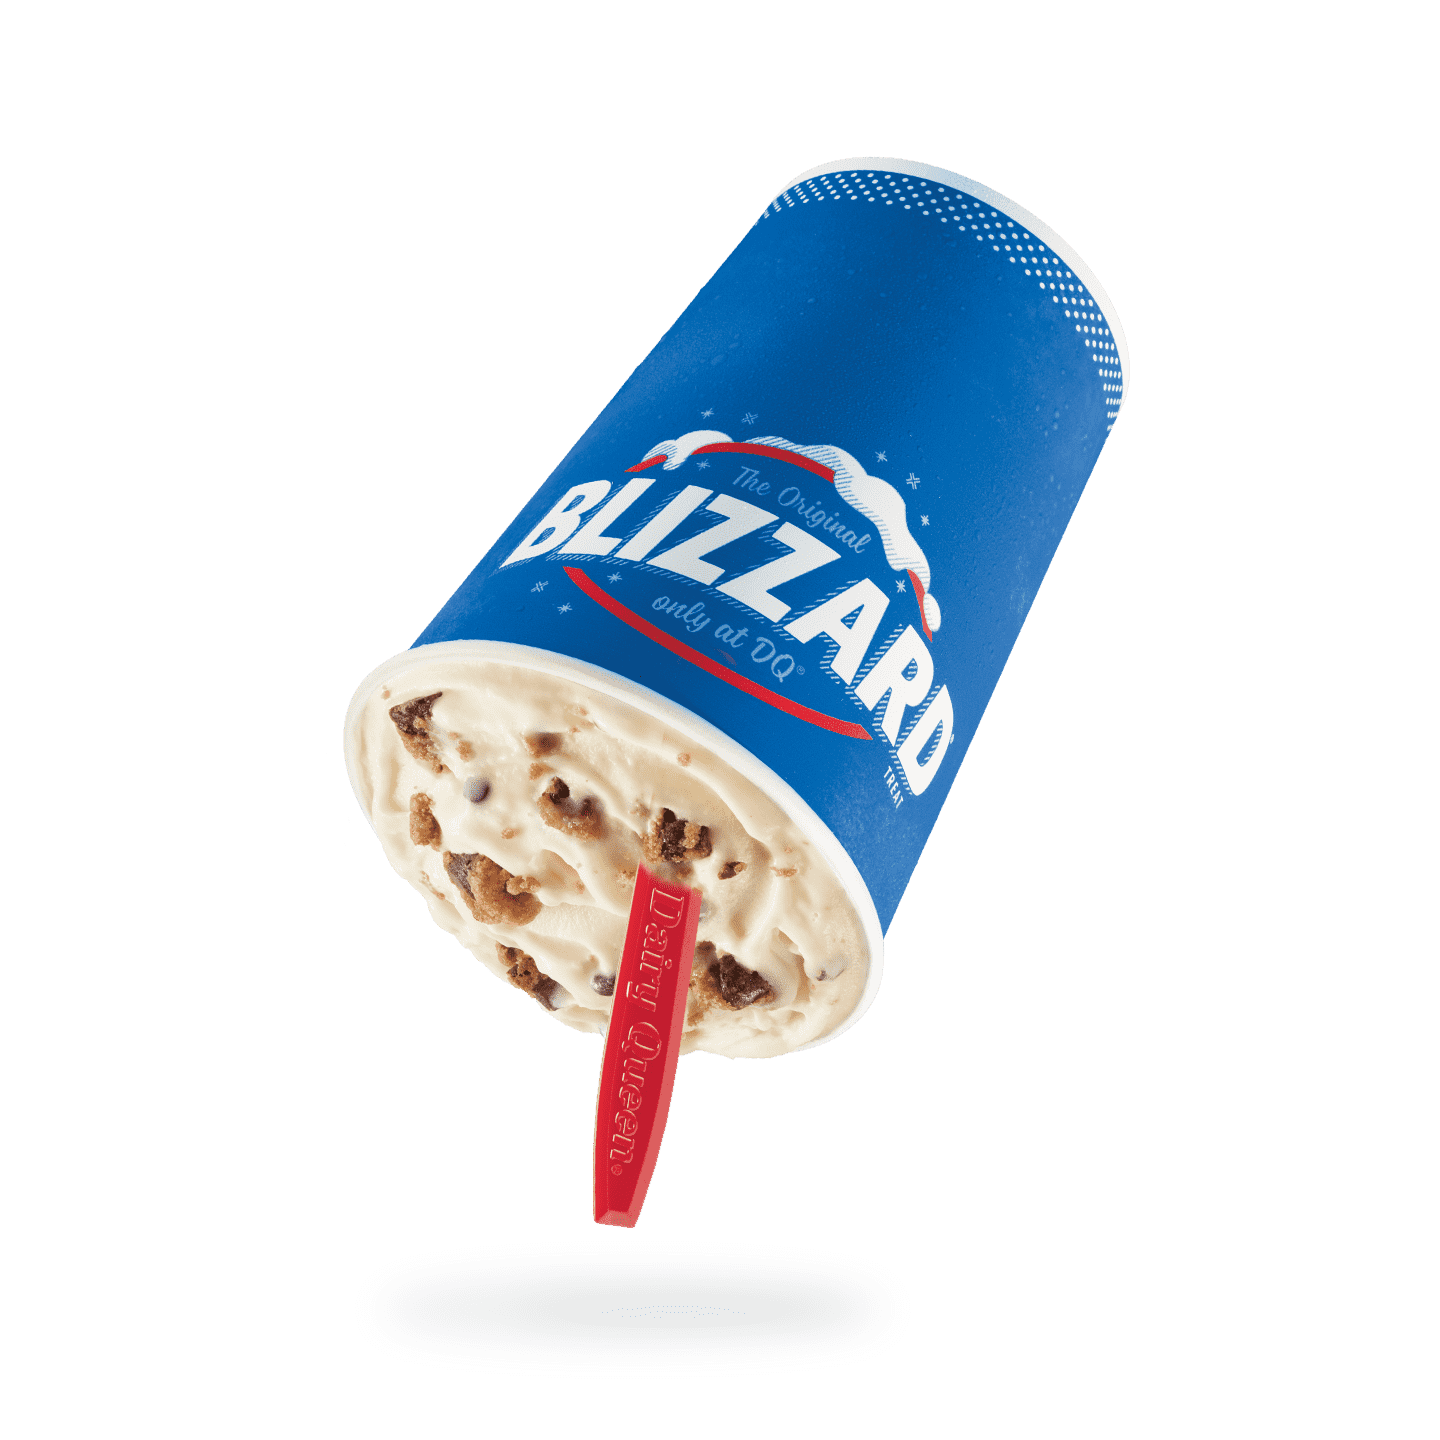 Dairy Queen Medium Nestle Toll House Chocolate Chip Cookie Blizzard Nutrition Facts